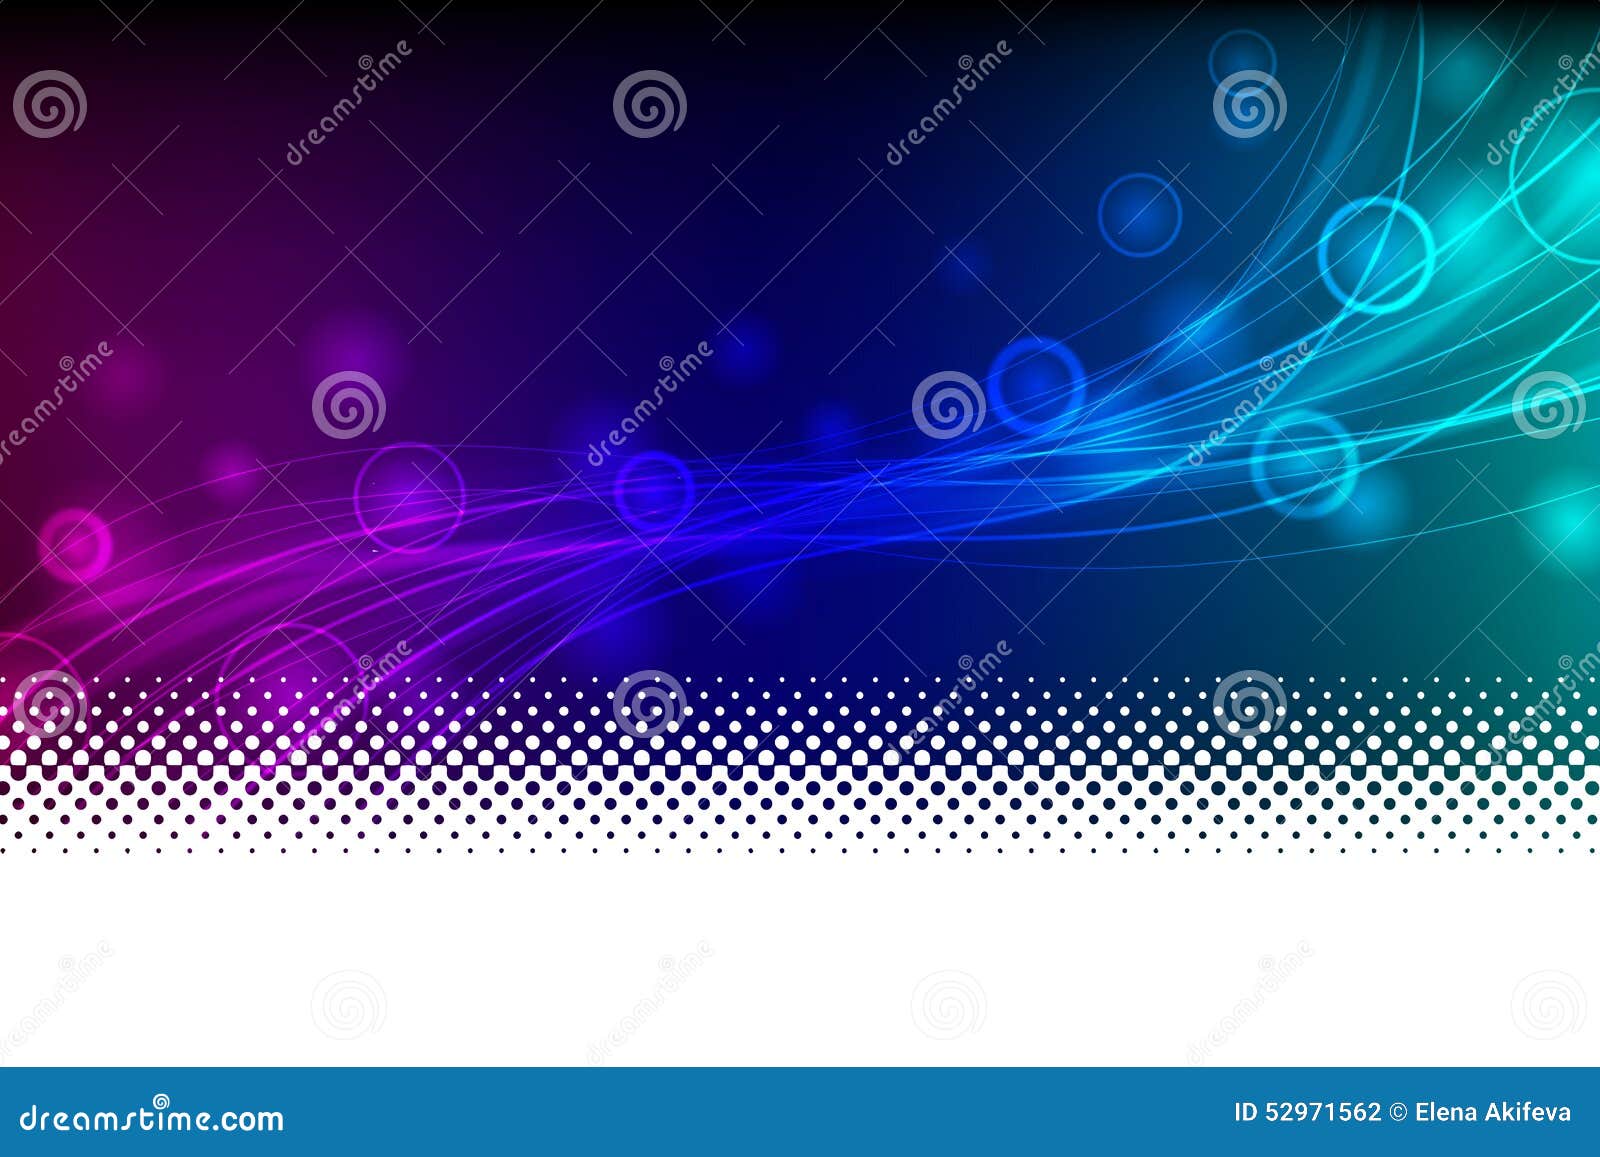 Blue and Violet Abstract Background Vector Stock Vector - Illustration